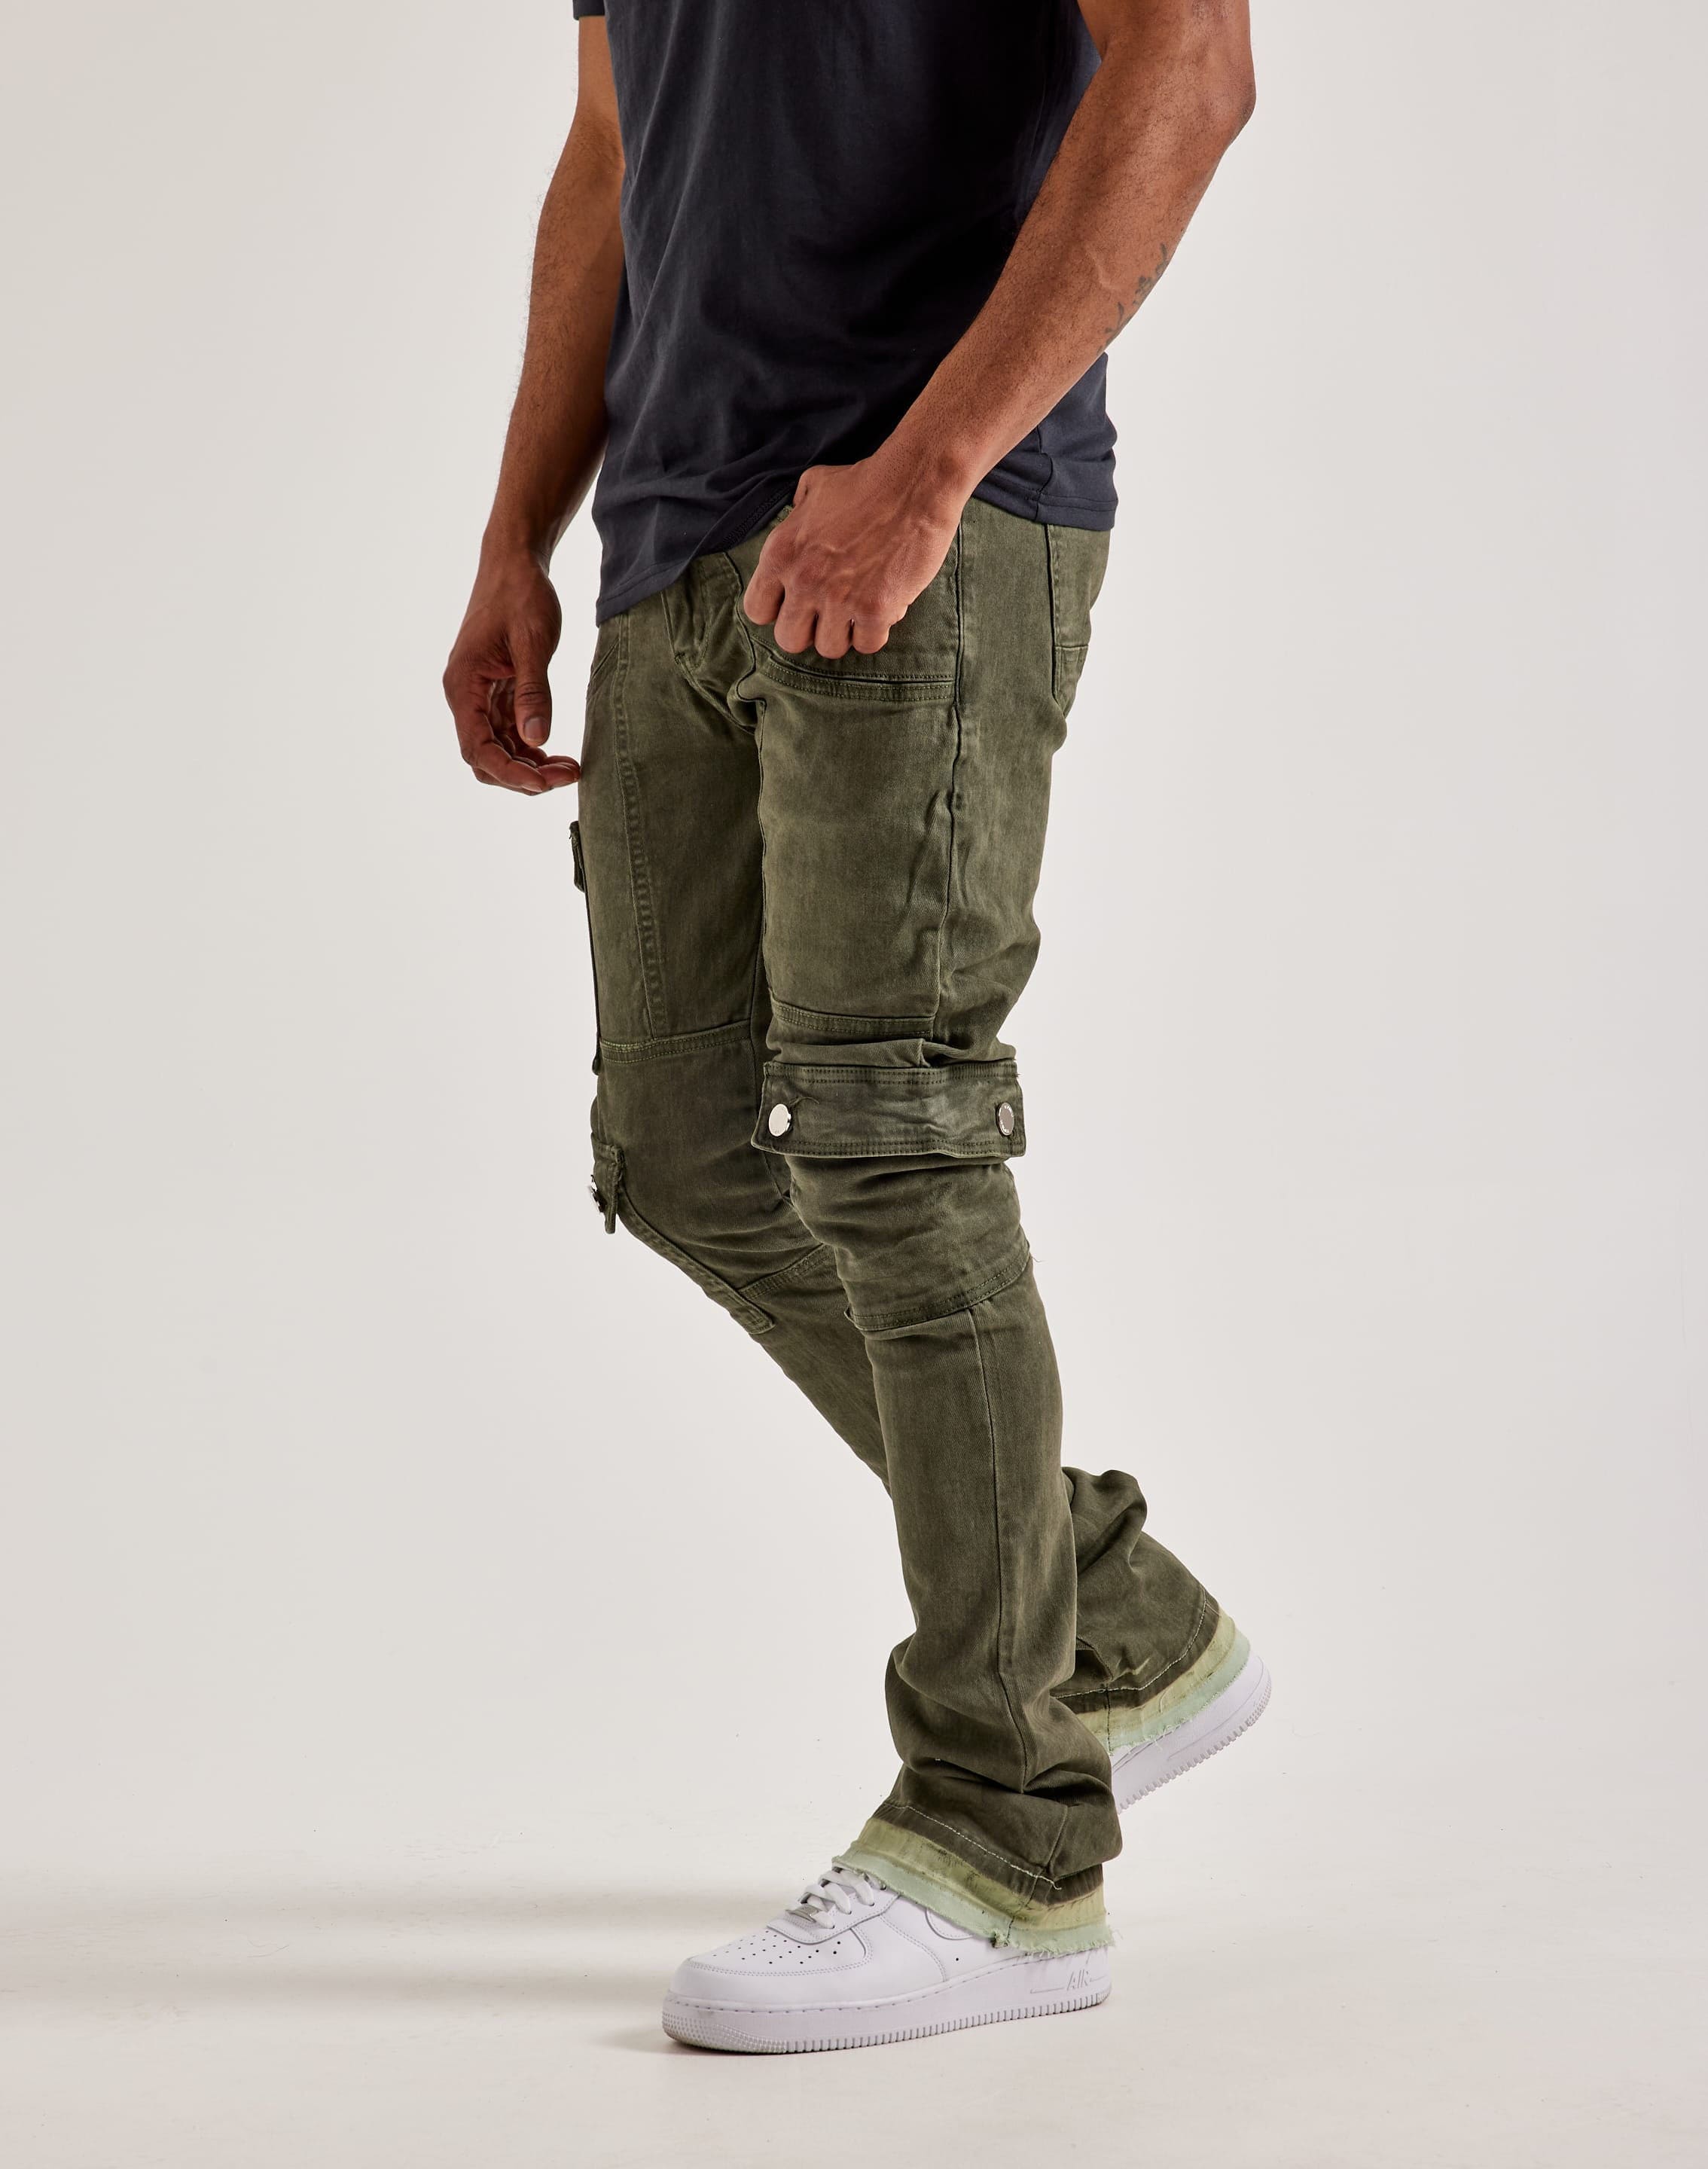 EMPYRE - NWOT Olive Green Army Cargo Relaxed Loose Big Boy Pants, Mens 36 x  30